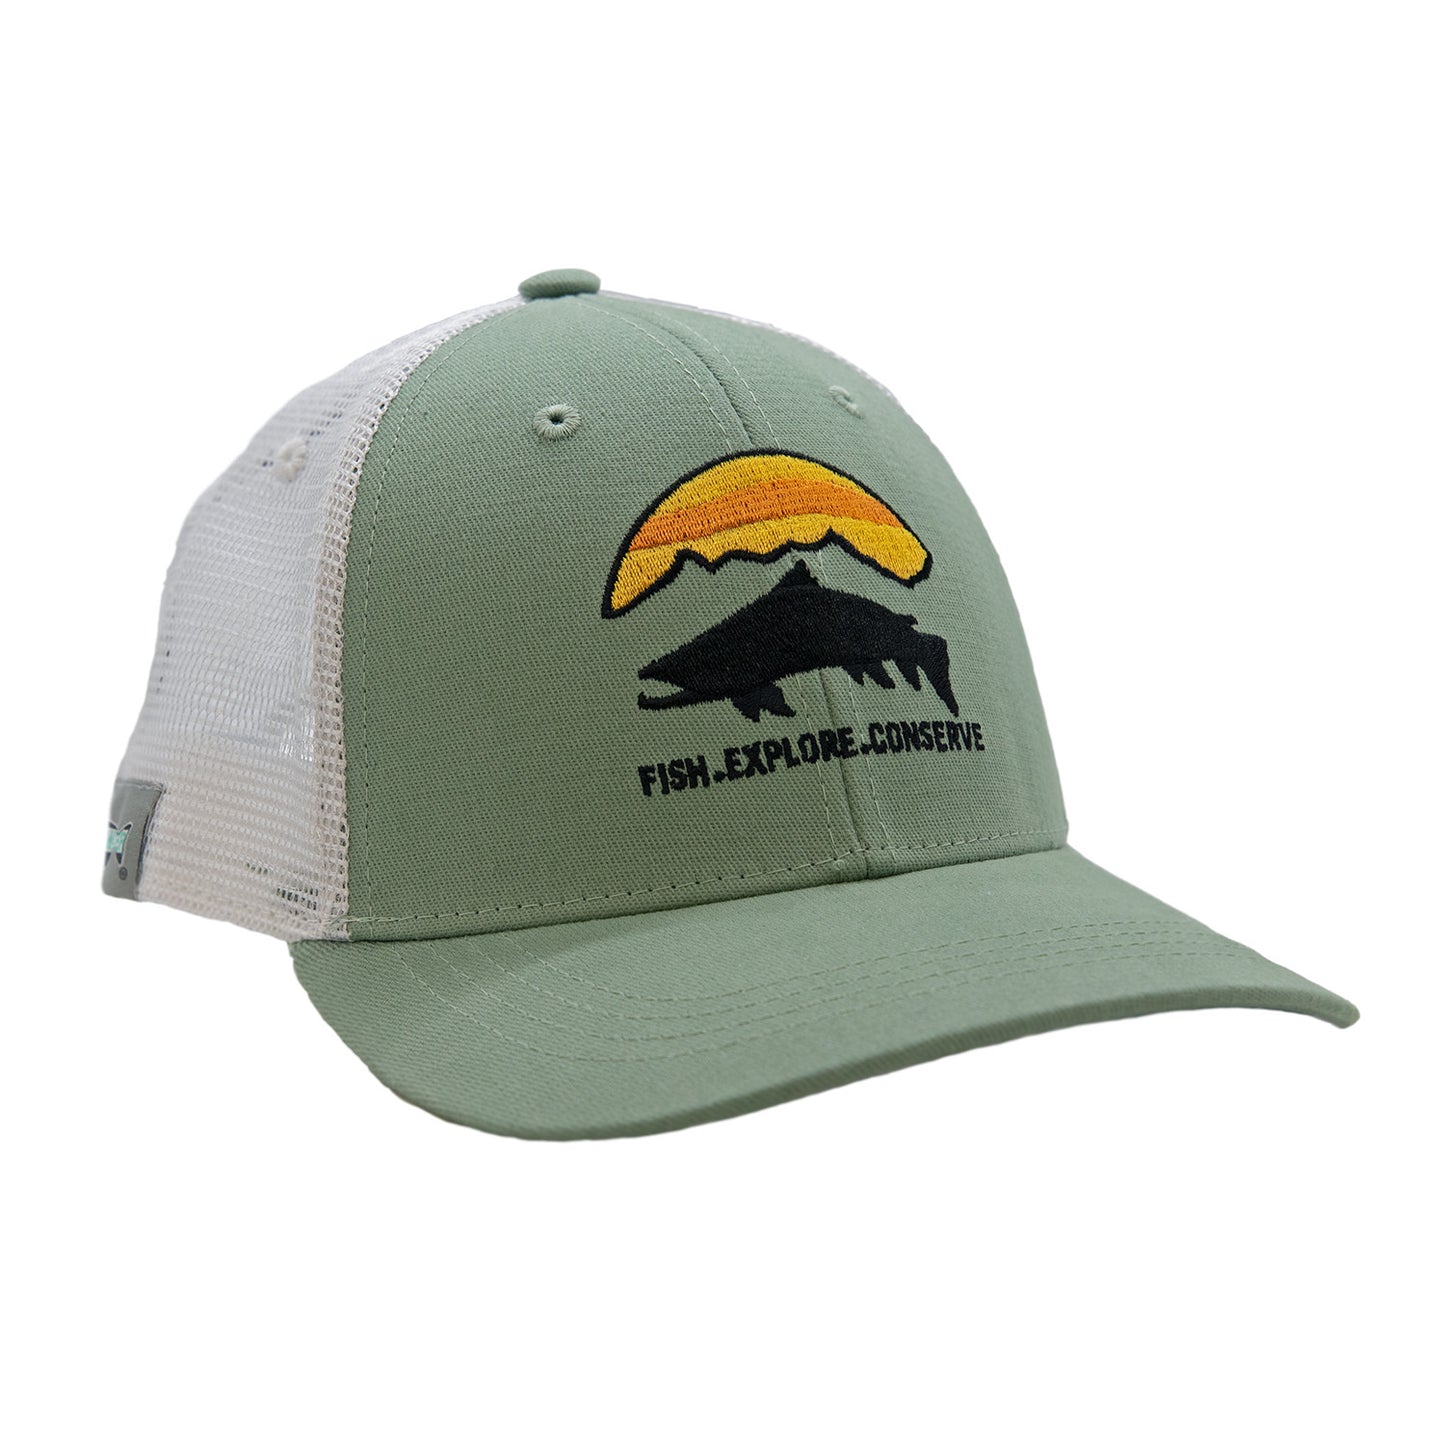 Light sage hat with white mesh with a trout silhouette, mountain range/sunset with words that read Fish Explore, conserve